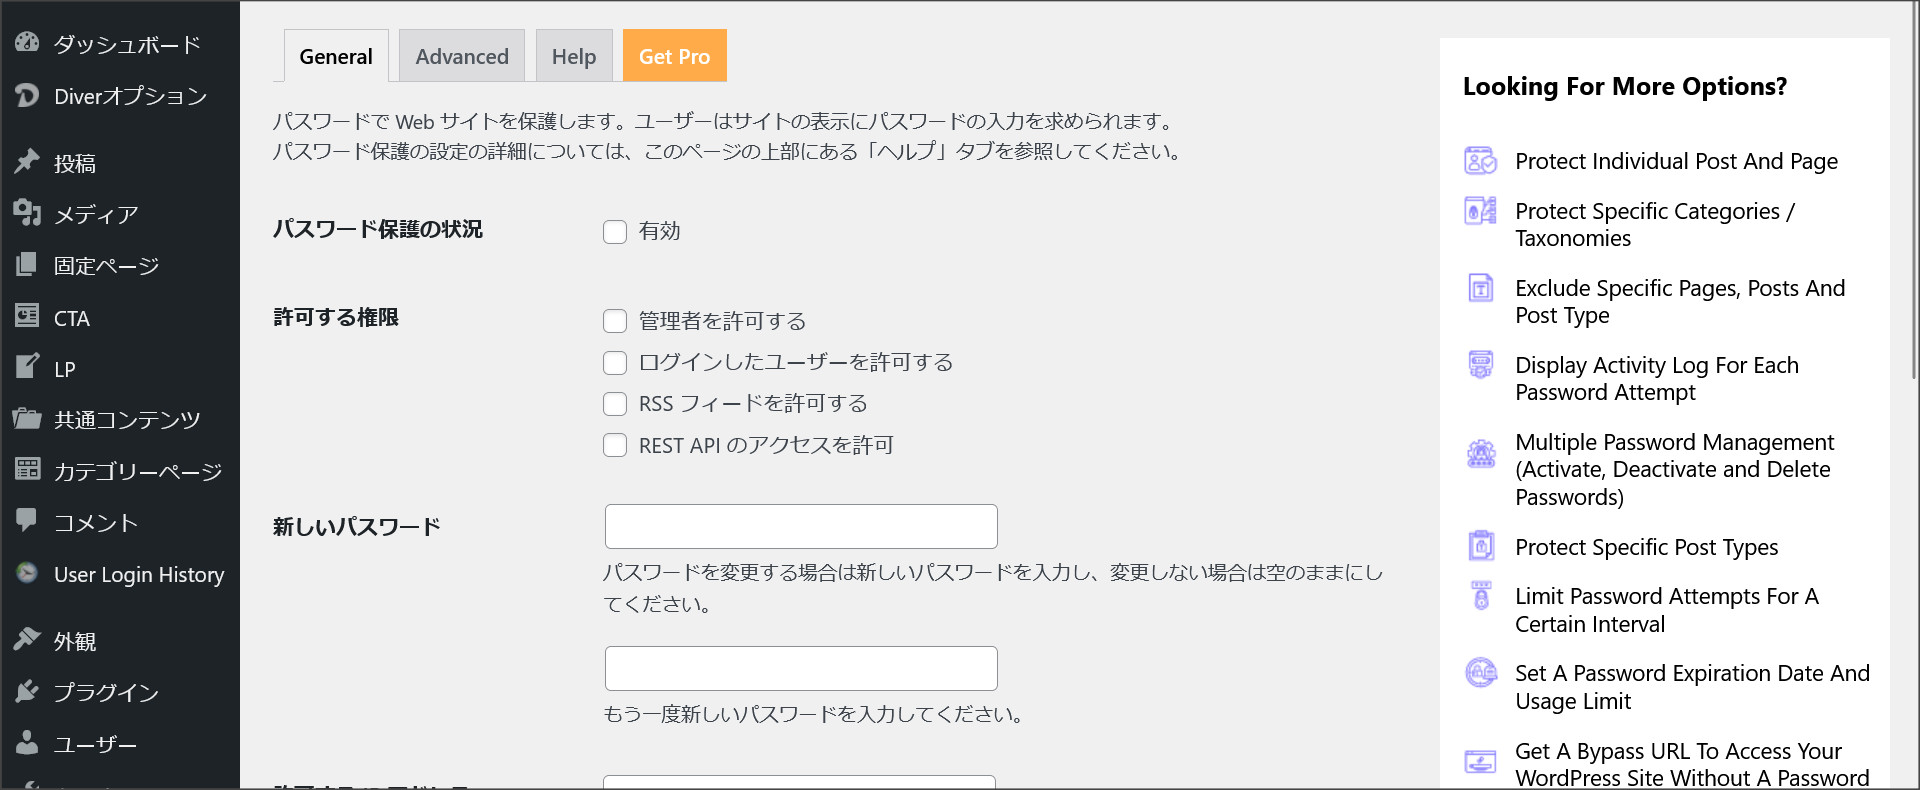 「Password Protected」の設定画面